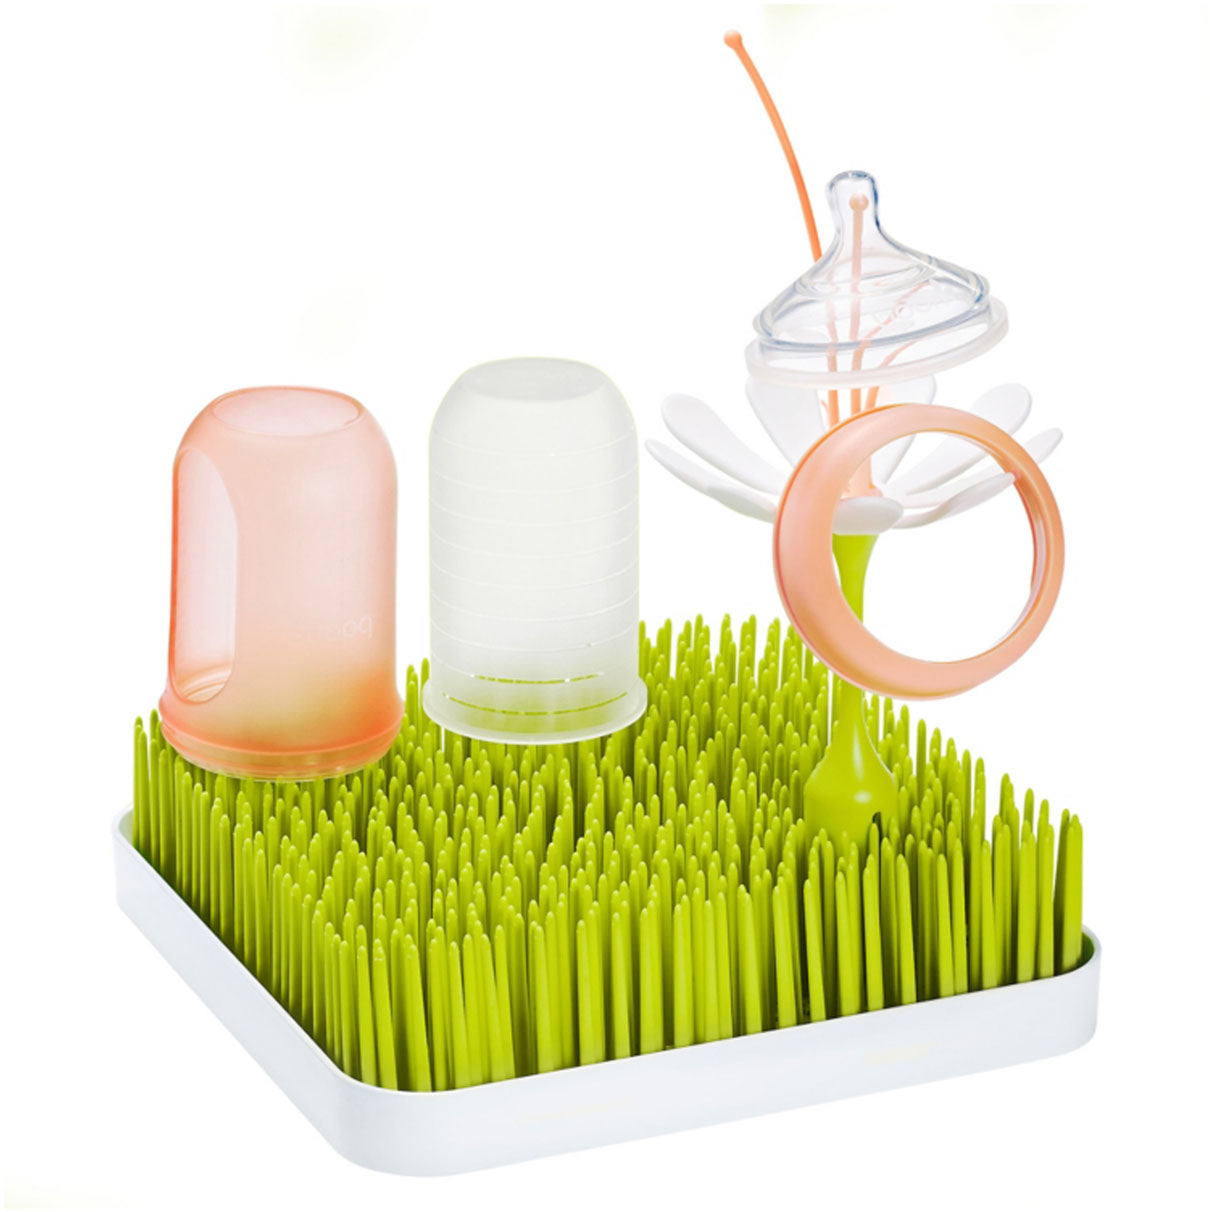 Stem Drying Rack Accessory Coral White - Boon